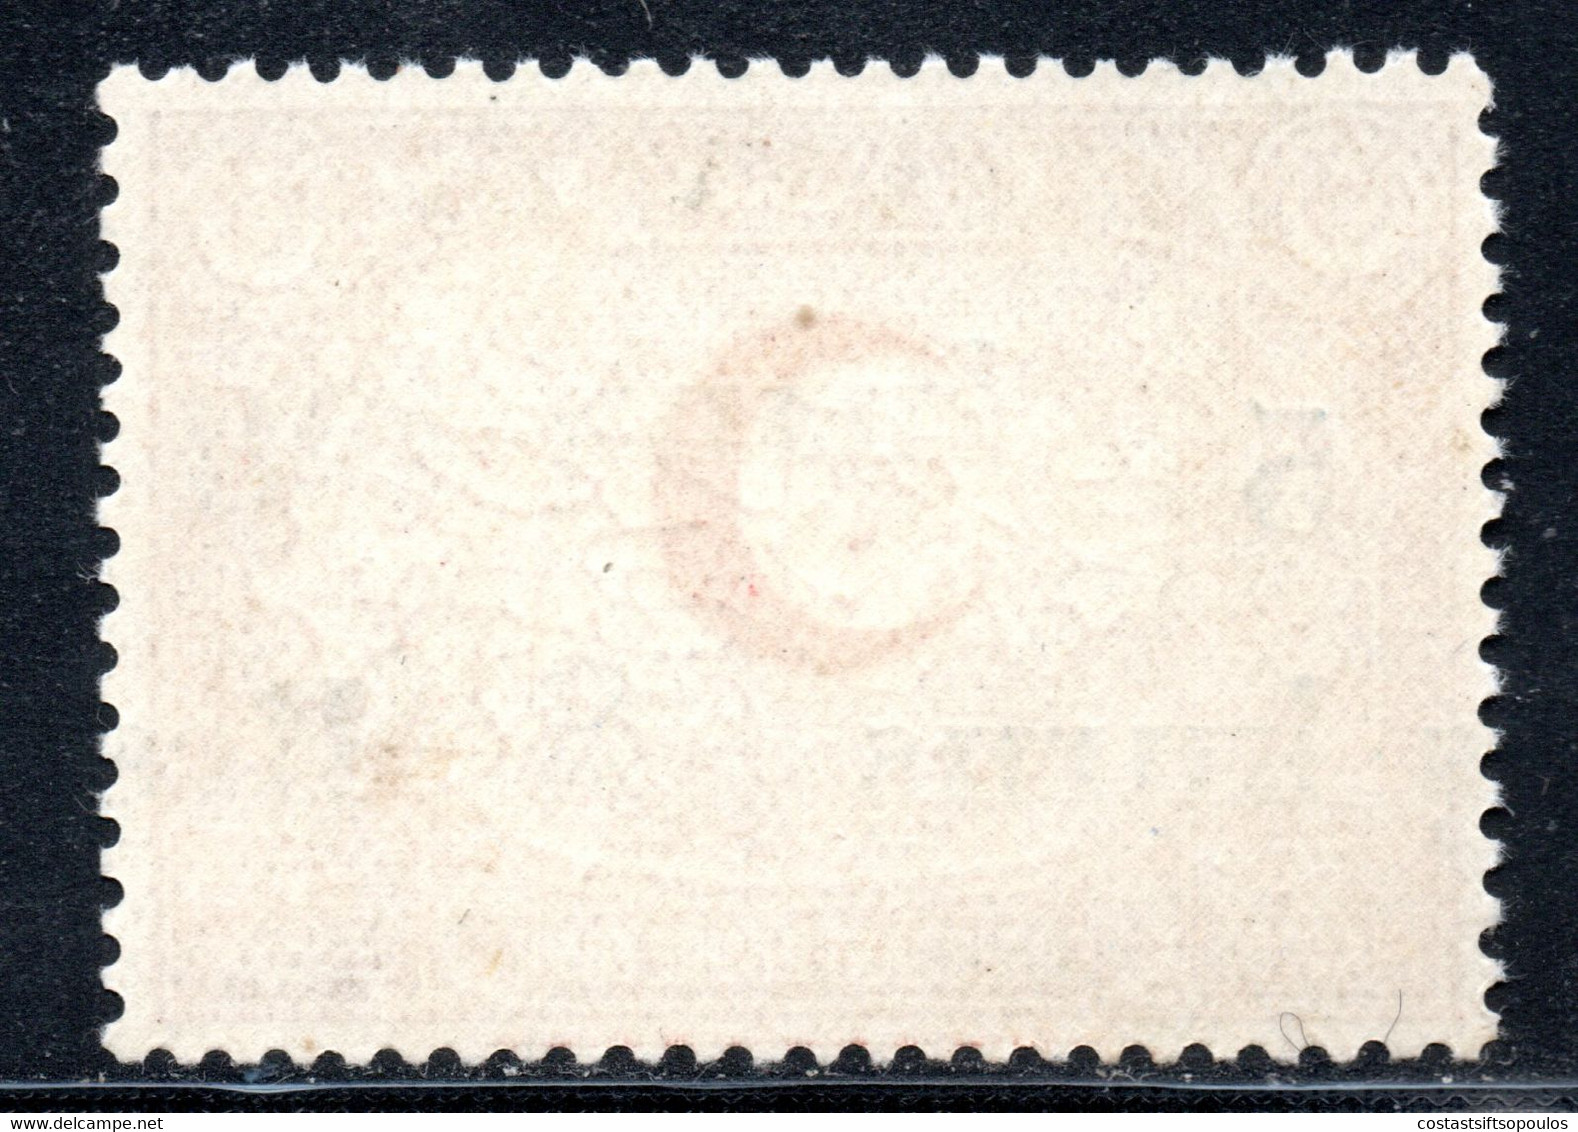 1012.TURKEY,1933-1934 RED CRESCENT,MAP MICH.25,SC.RA 22 DOUBLE SURCHARGE ONE INVERTED,MNH,UNRECORDED - Nuevos